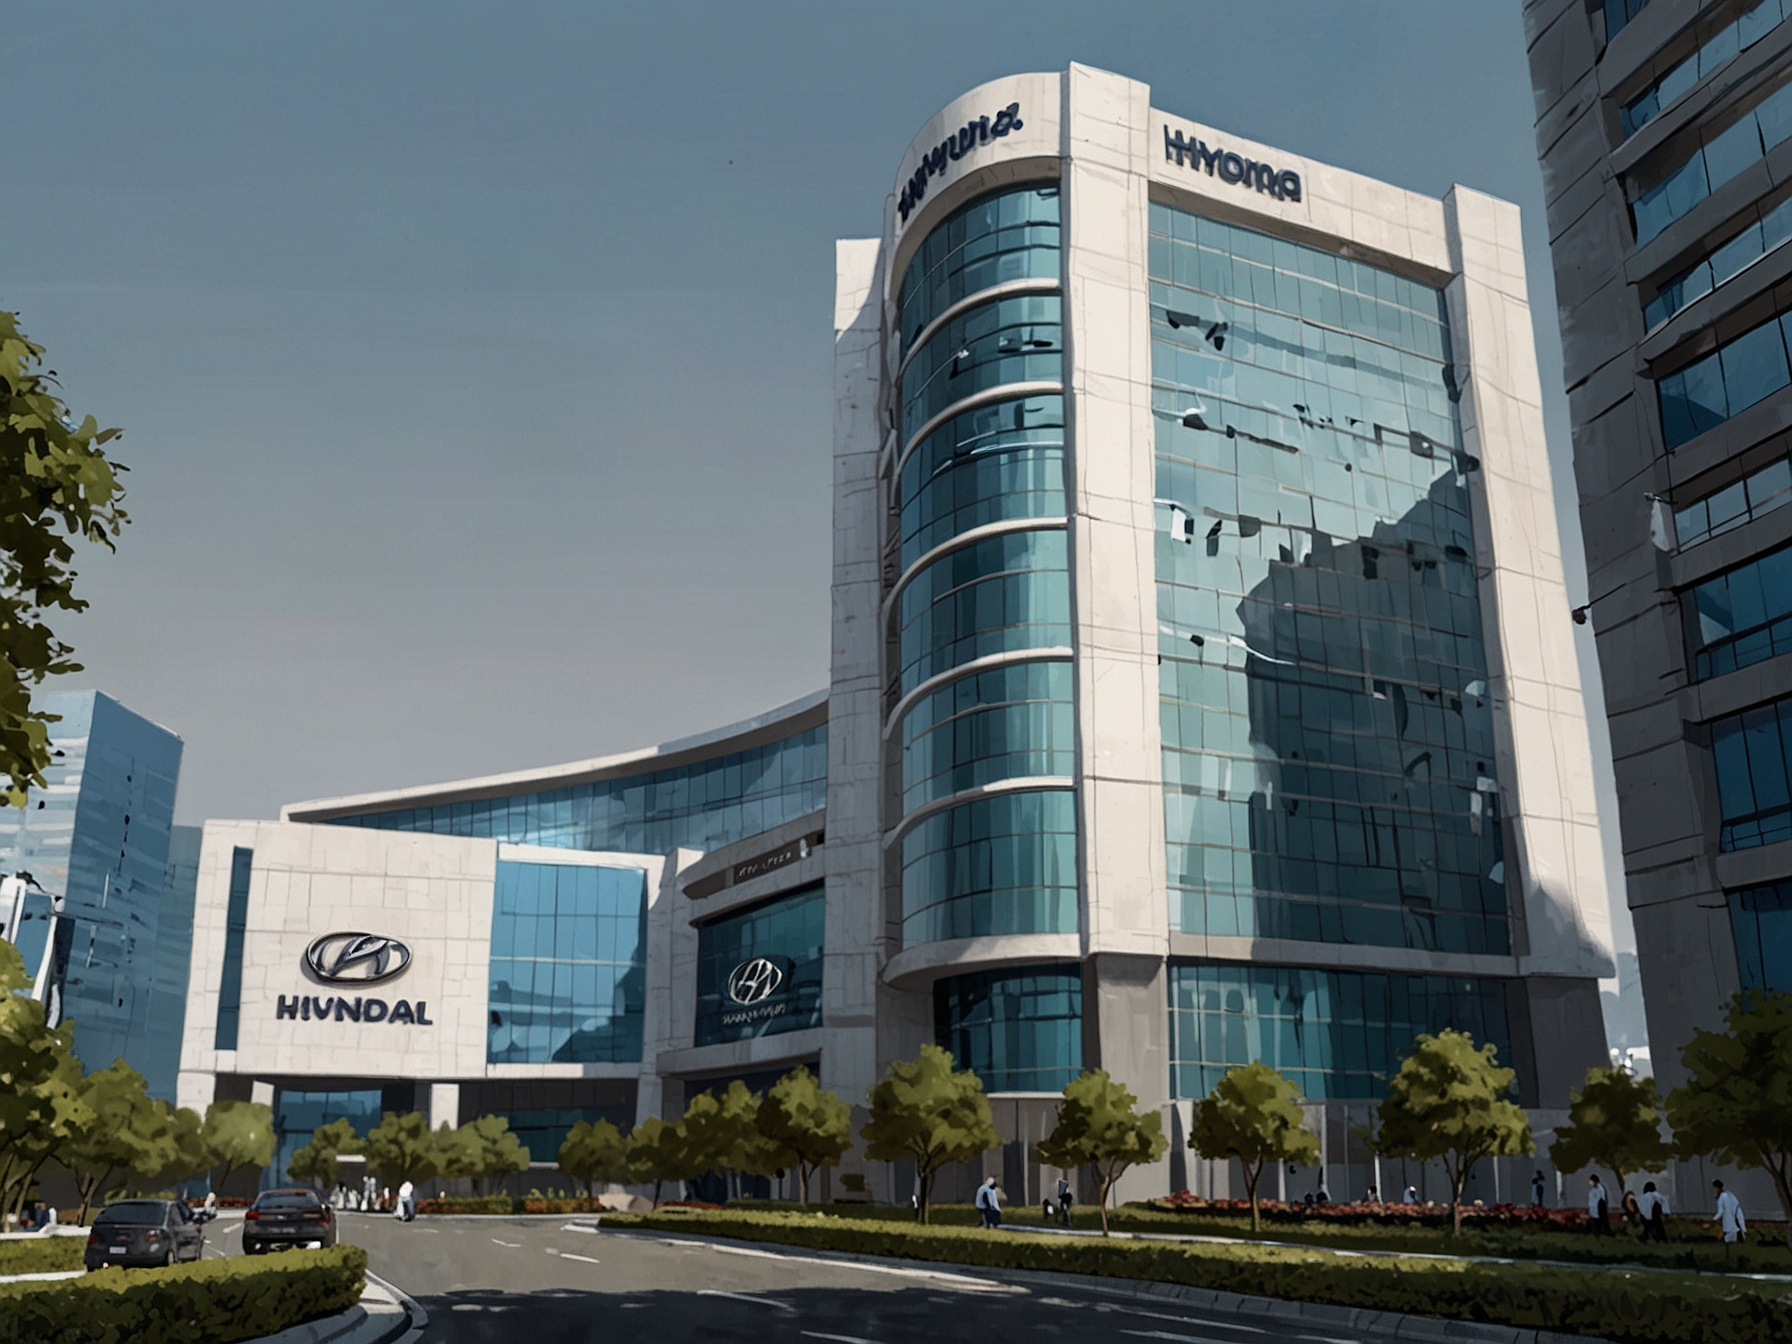 An illustration showing the Hyundai Motor India headquarters with a vibrant backdrop of the Indian stock exchange, symbolizing the company's upcoming IPO and market excitement.